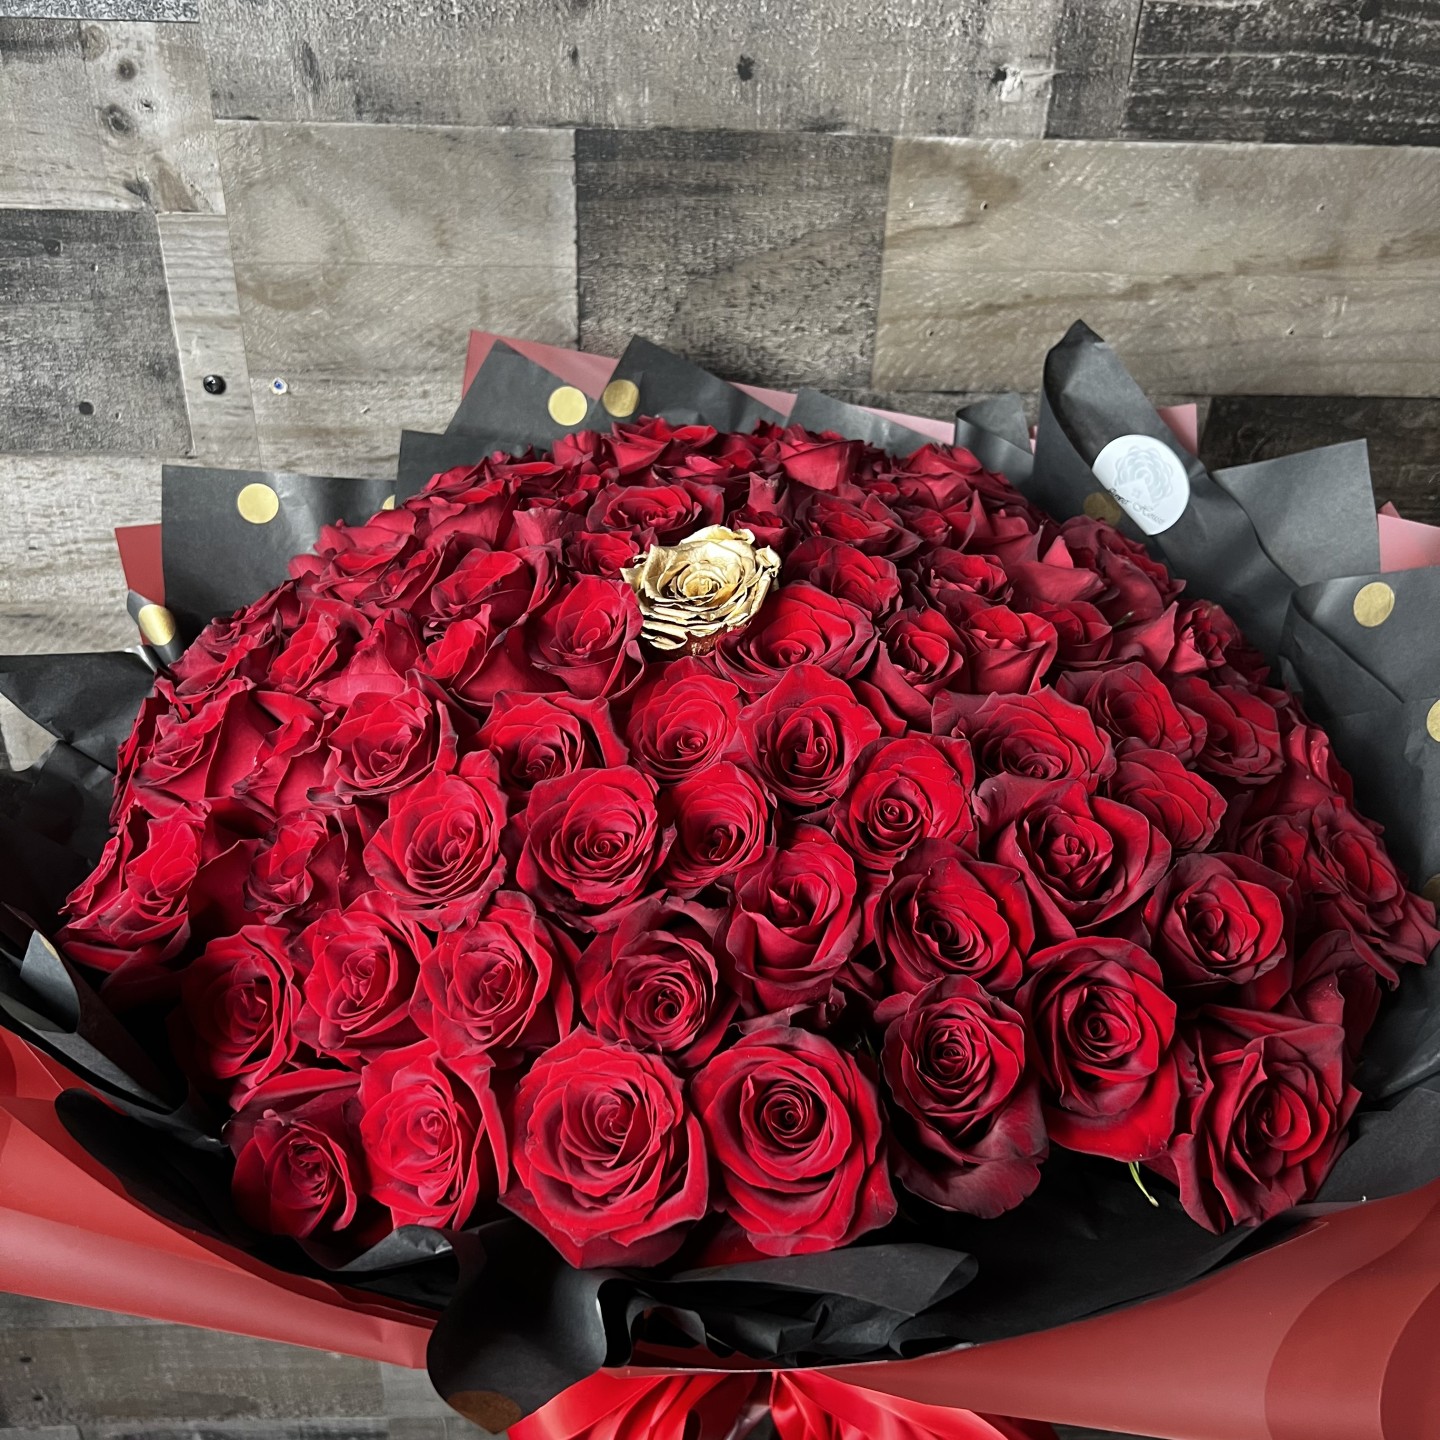 100 Red Roses With 1 Gold Rose In The Middle Hand-Tied Bouquet